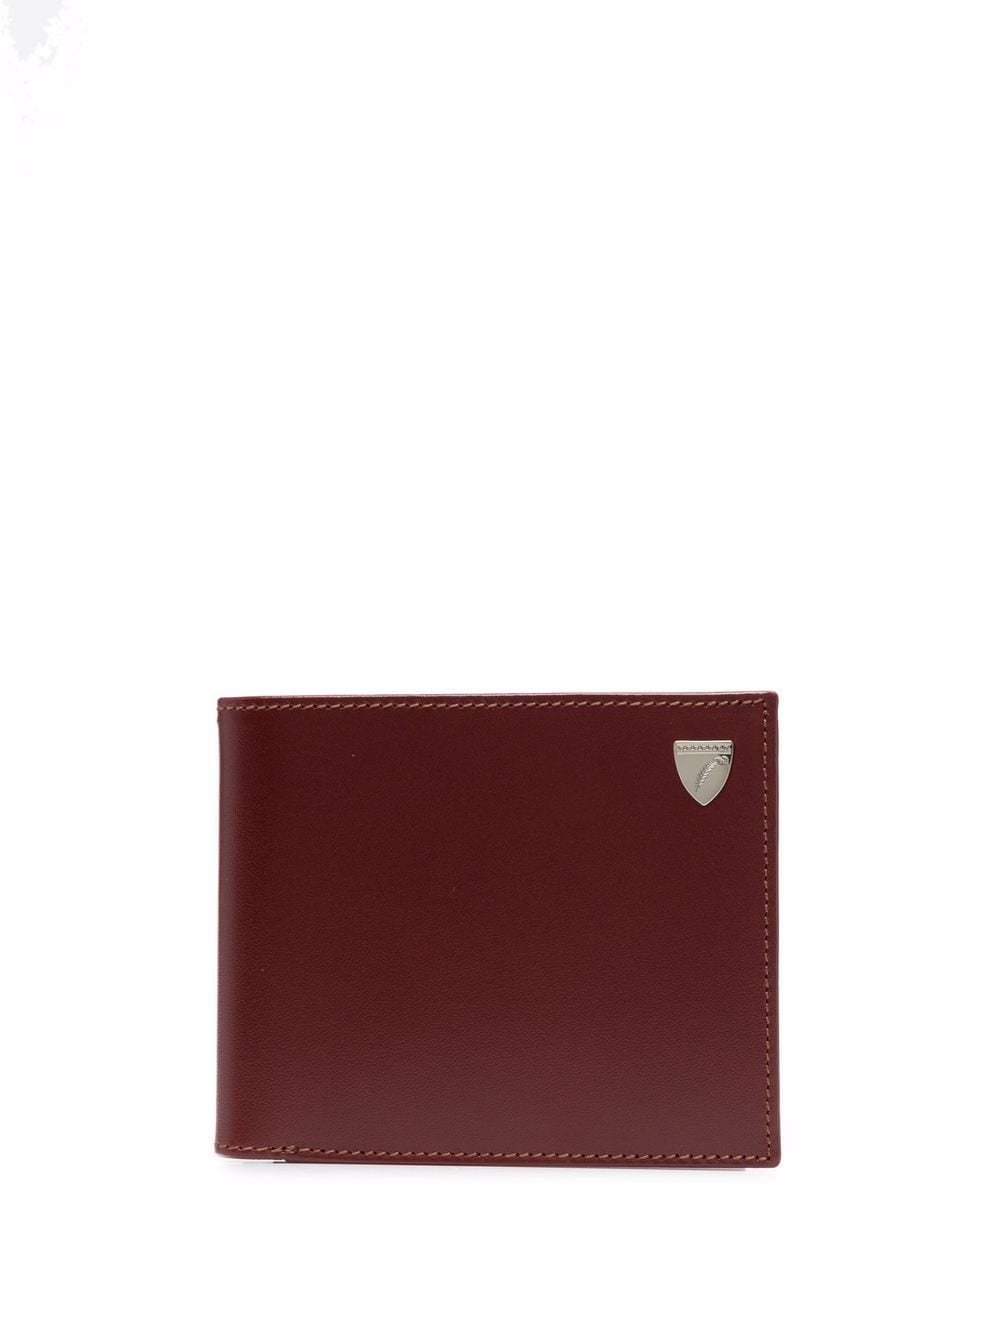 Aspinal Of London bi-fold leather wallet - Brown von Aspinal Of London